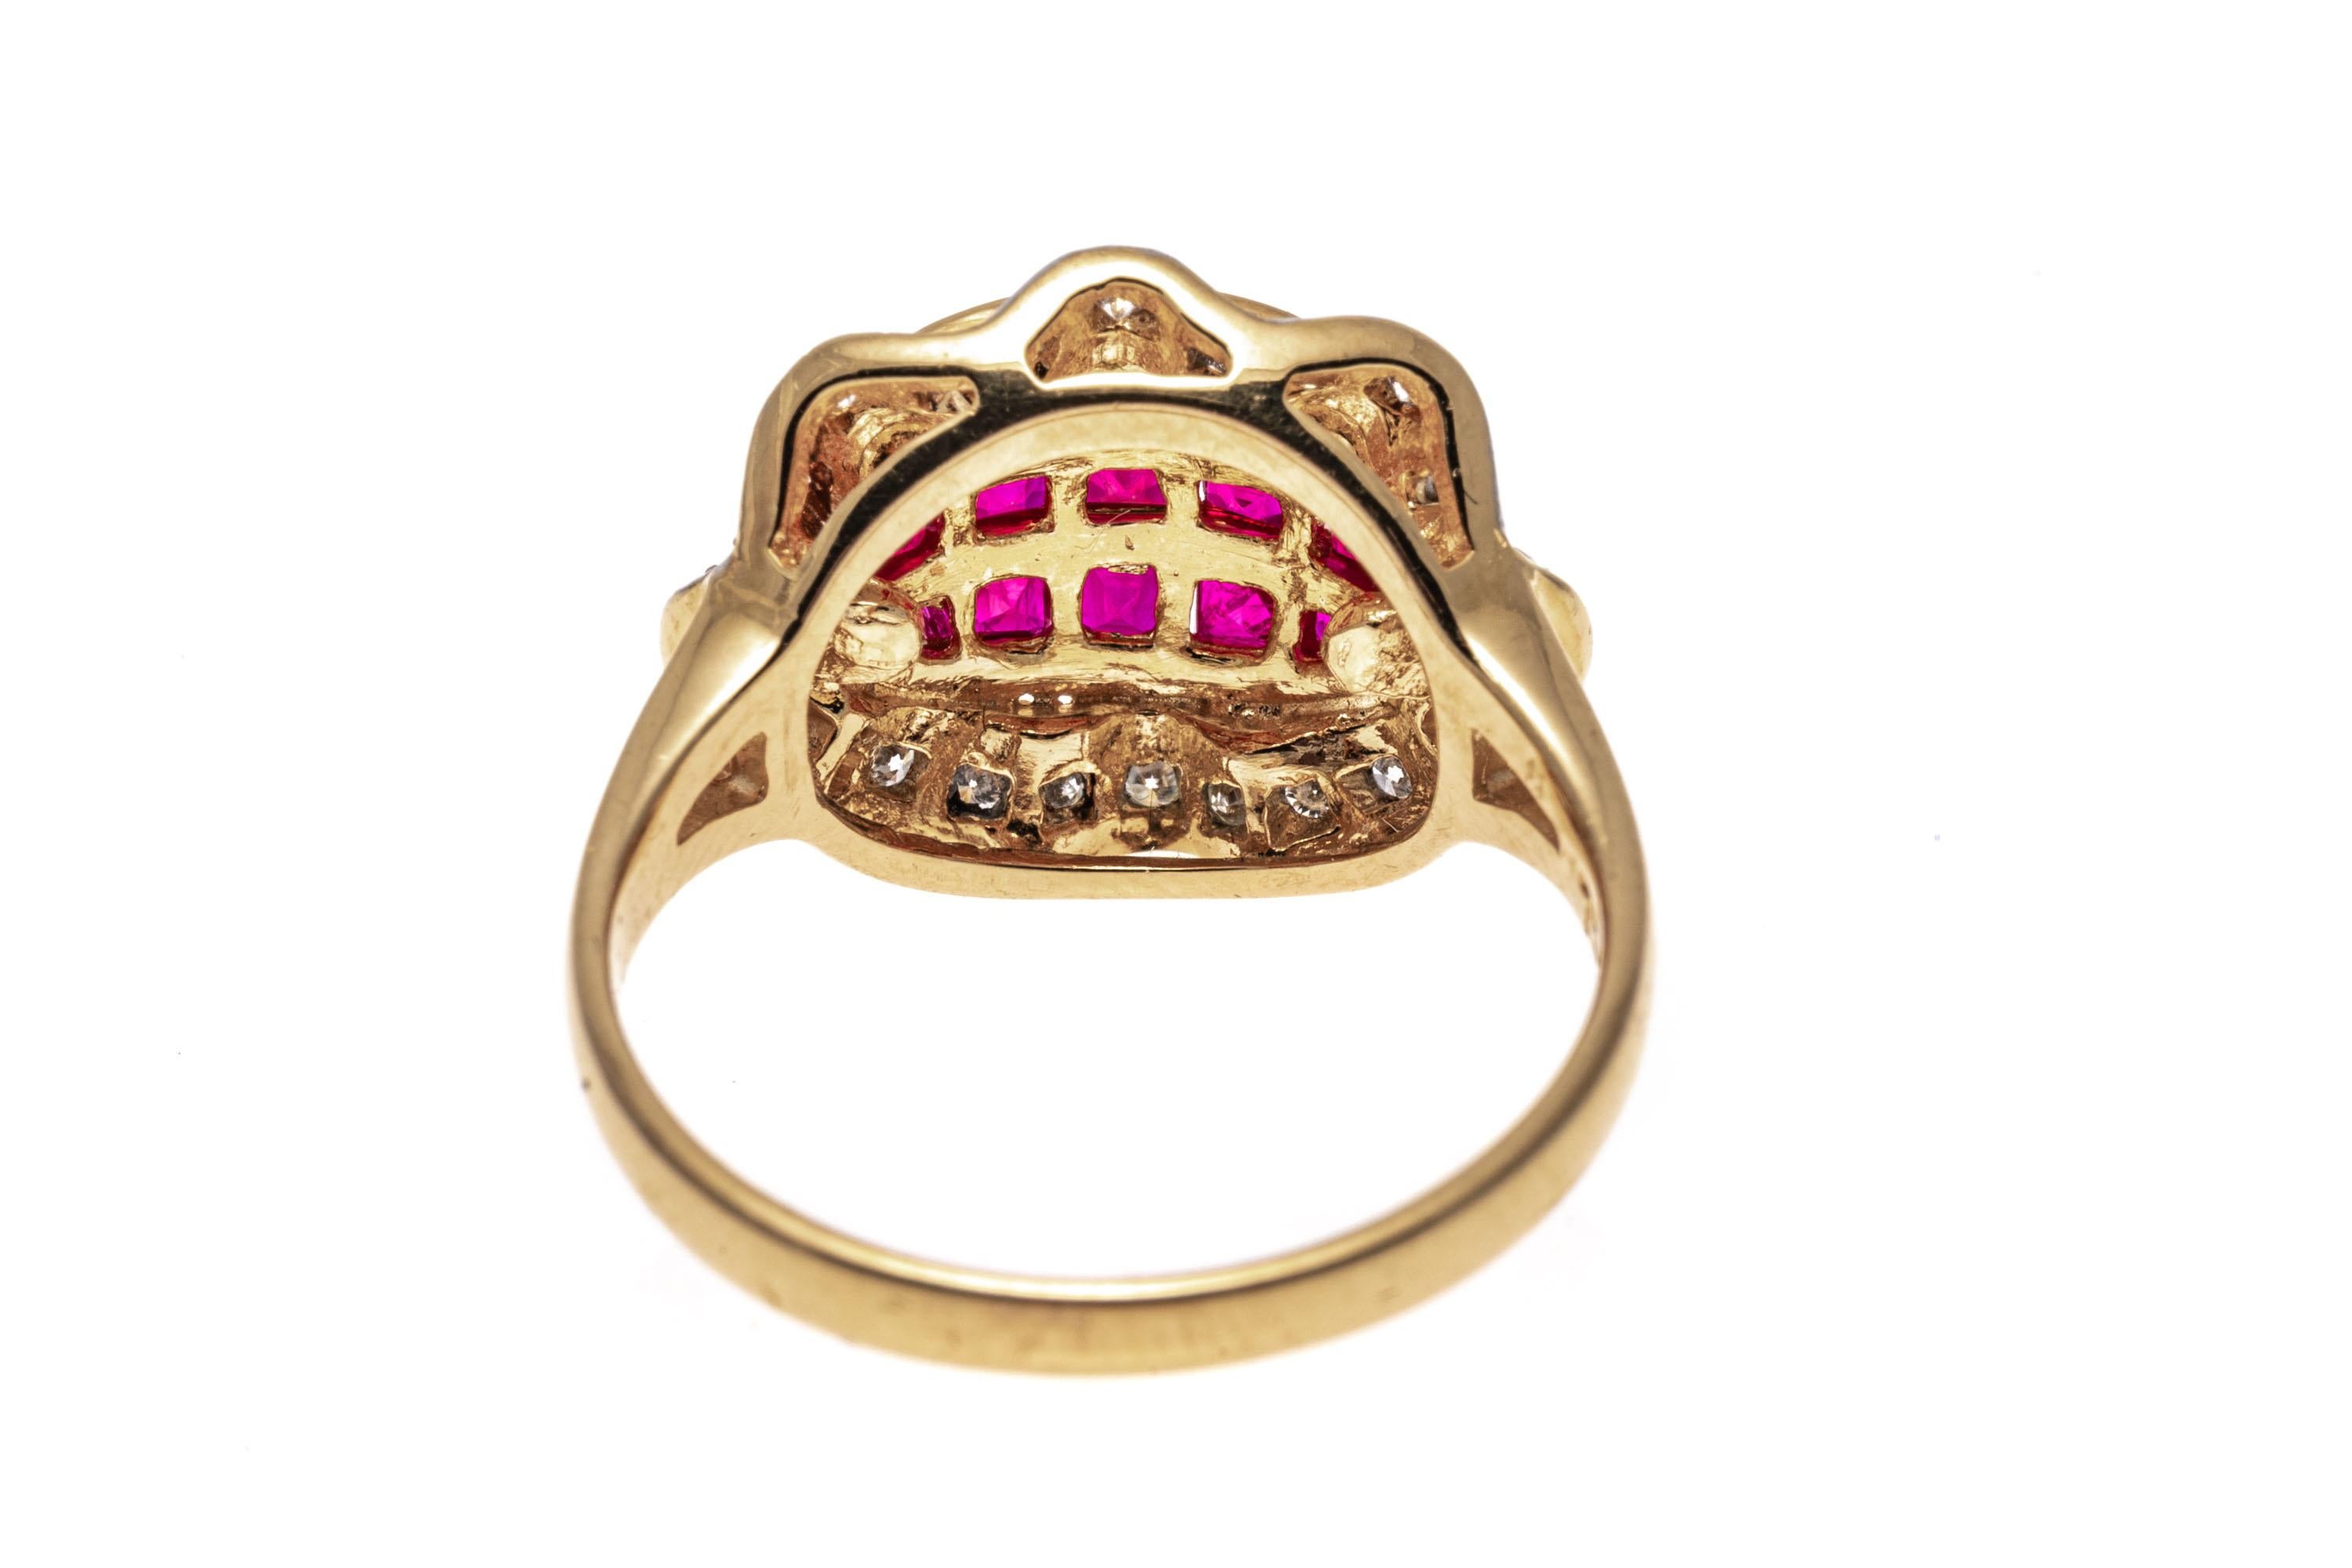 Modern 18k Yellow Gold Calibre Cut Ruby Ring With Ruffled Diamond Border, Size 7 For Sale